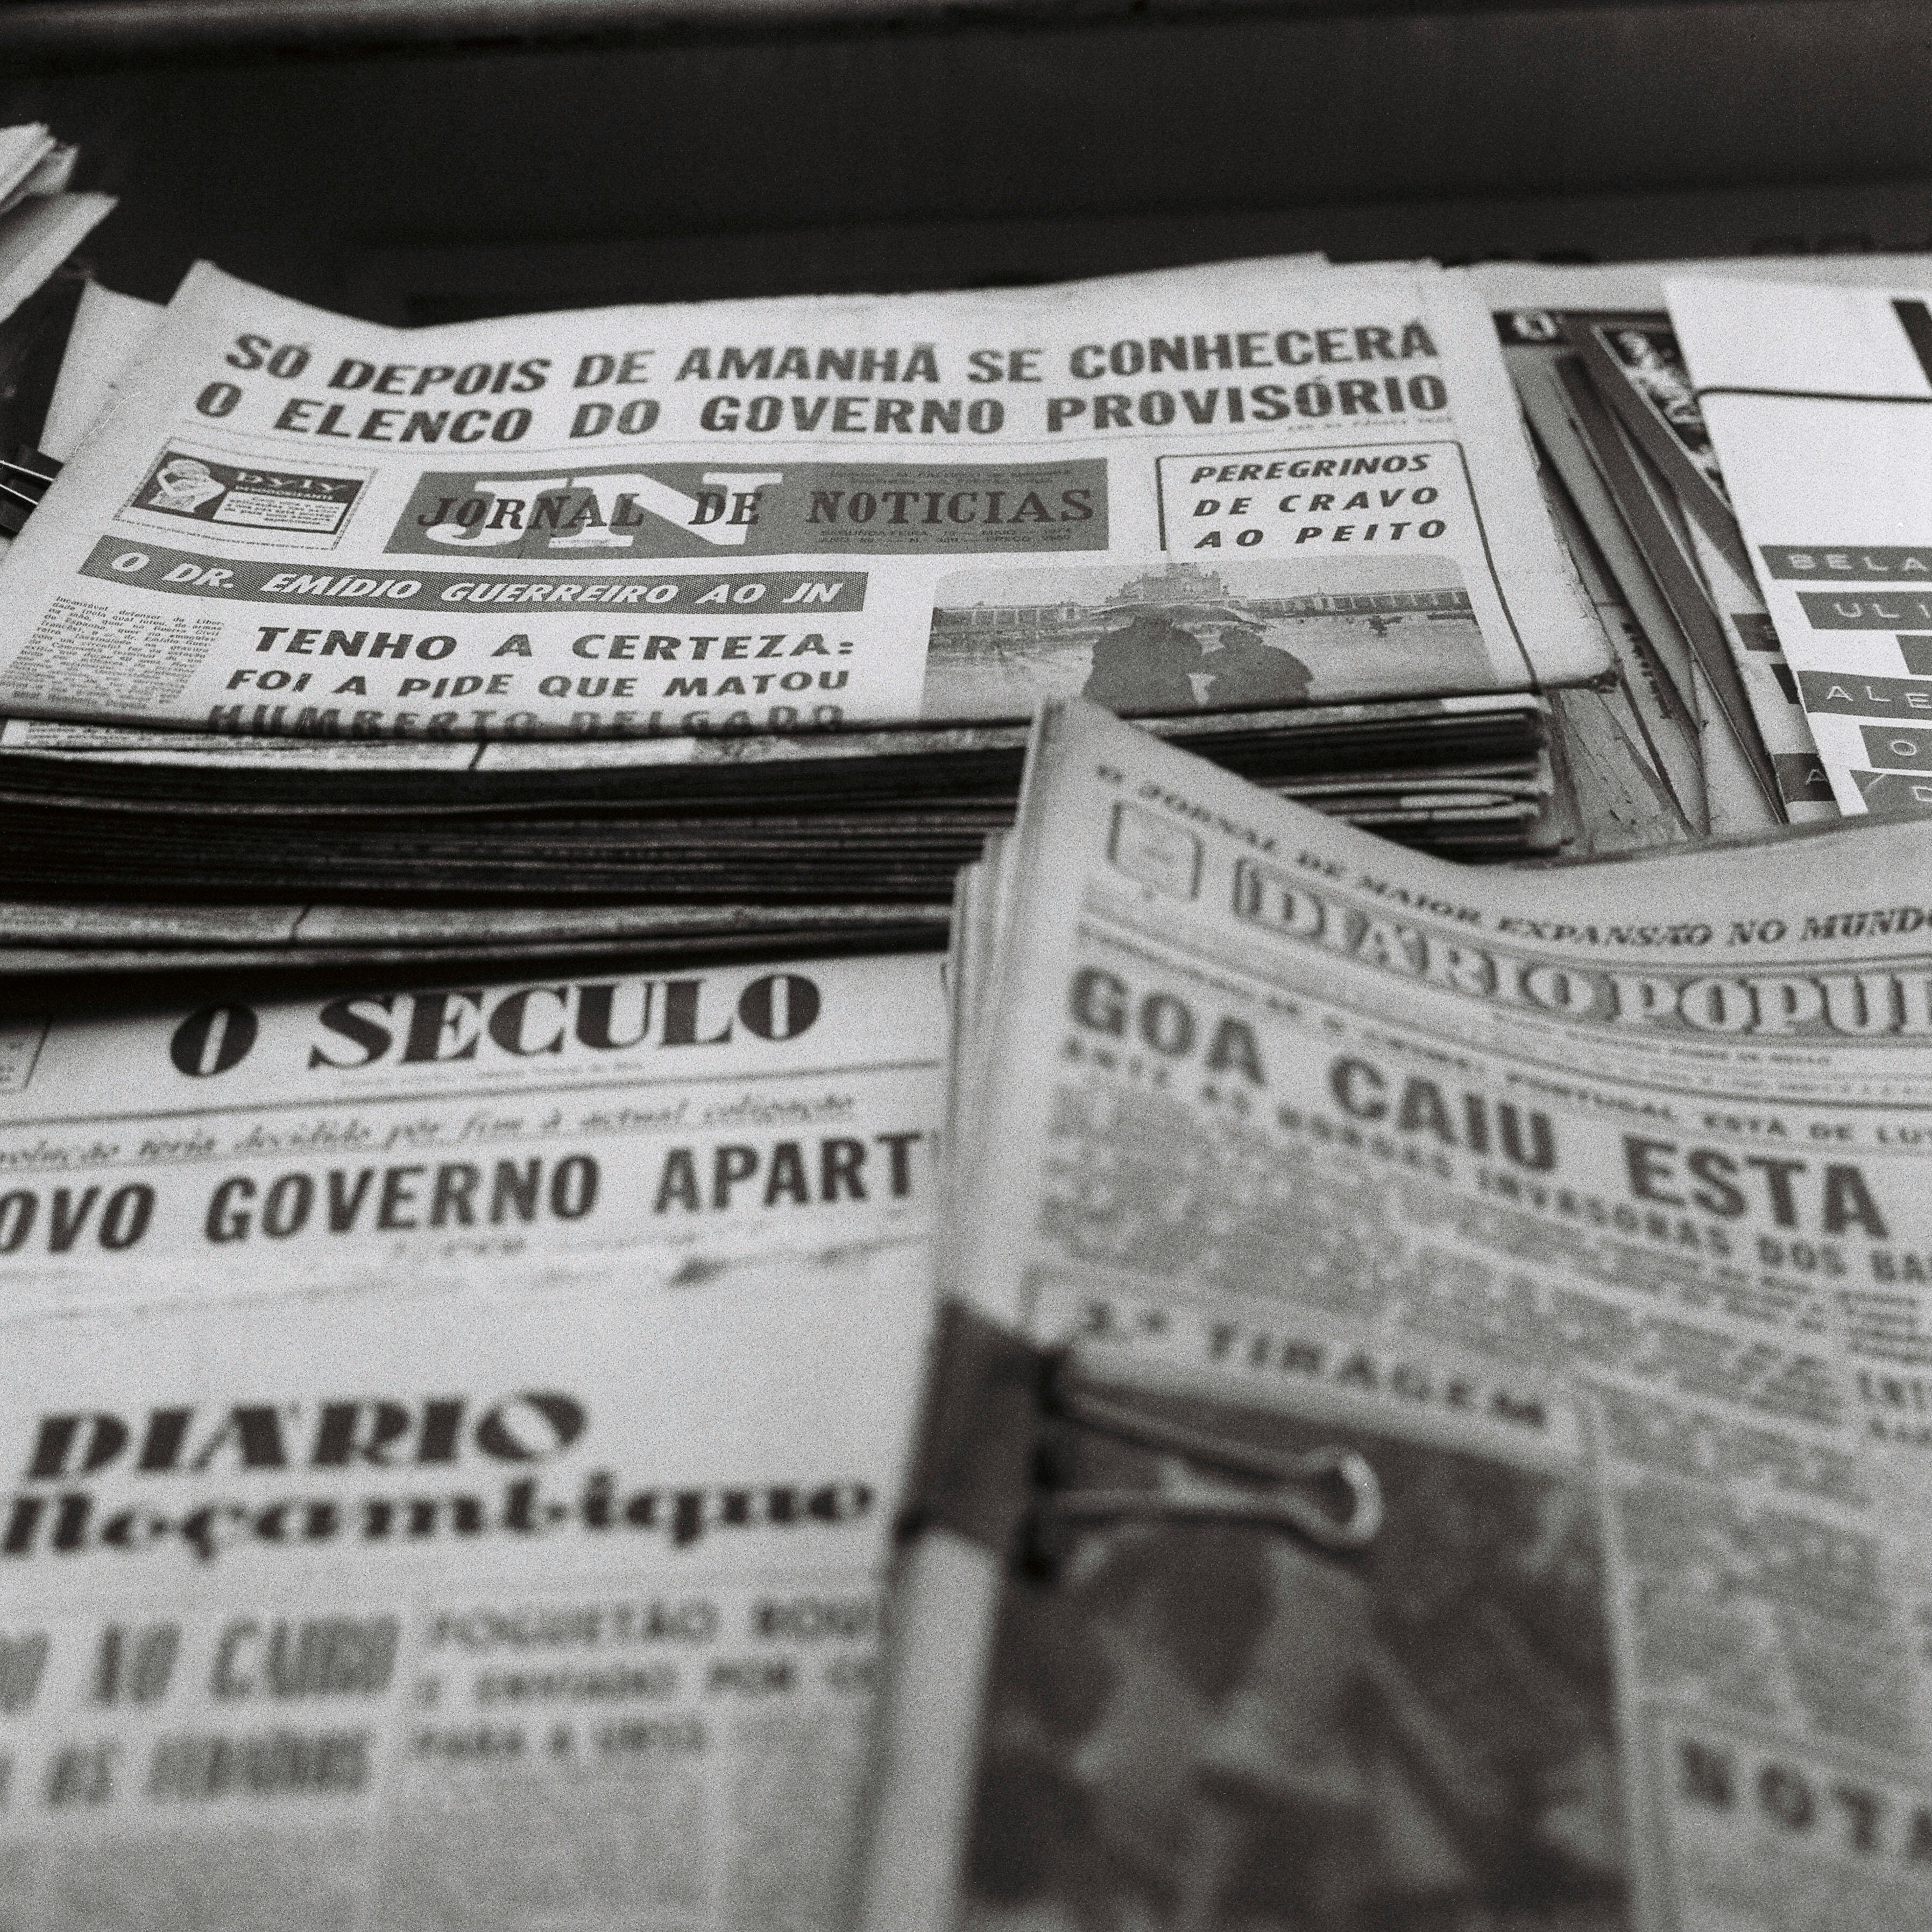 Newspapers are piled up on a table